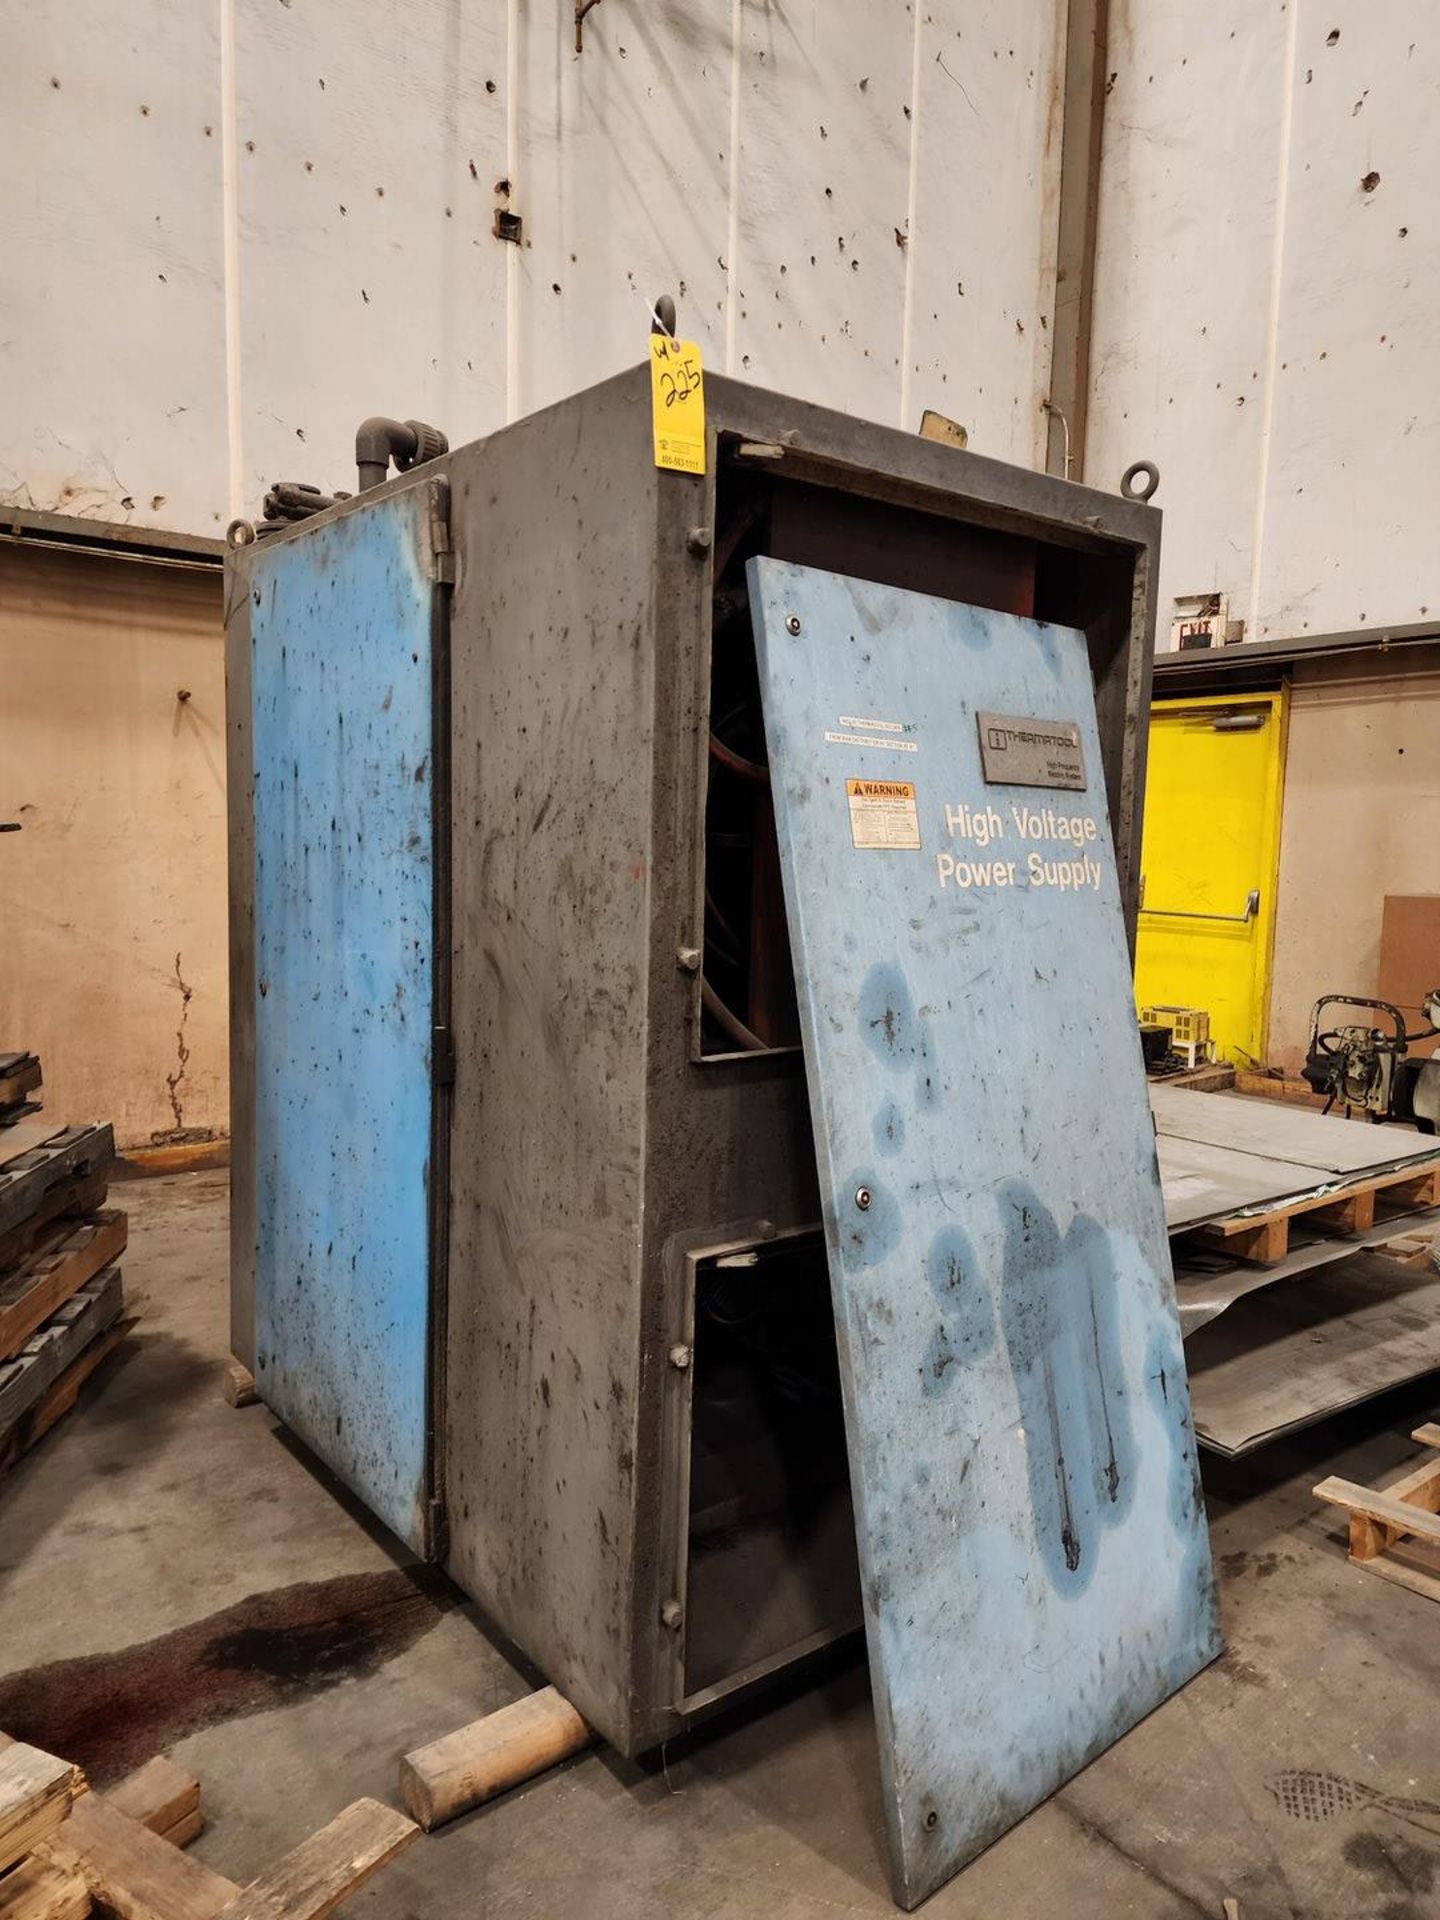 Thermatool Solid State HF Welder (Parts Only) (No Tag); W/ Power Supply Unit - Image 15 of 17